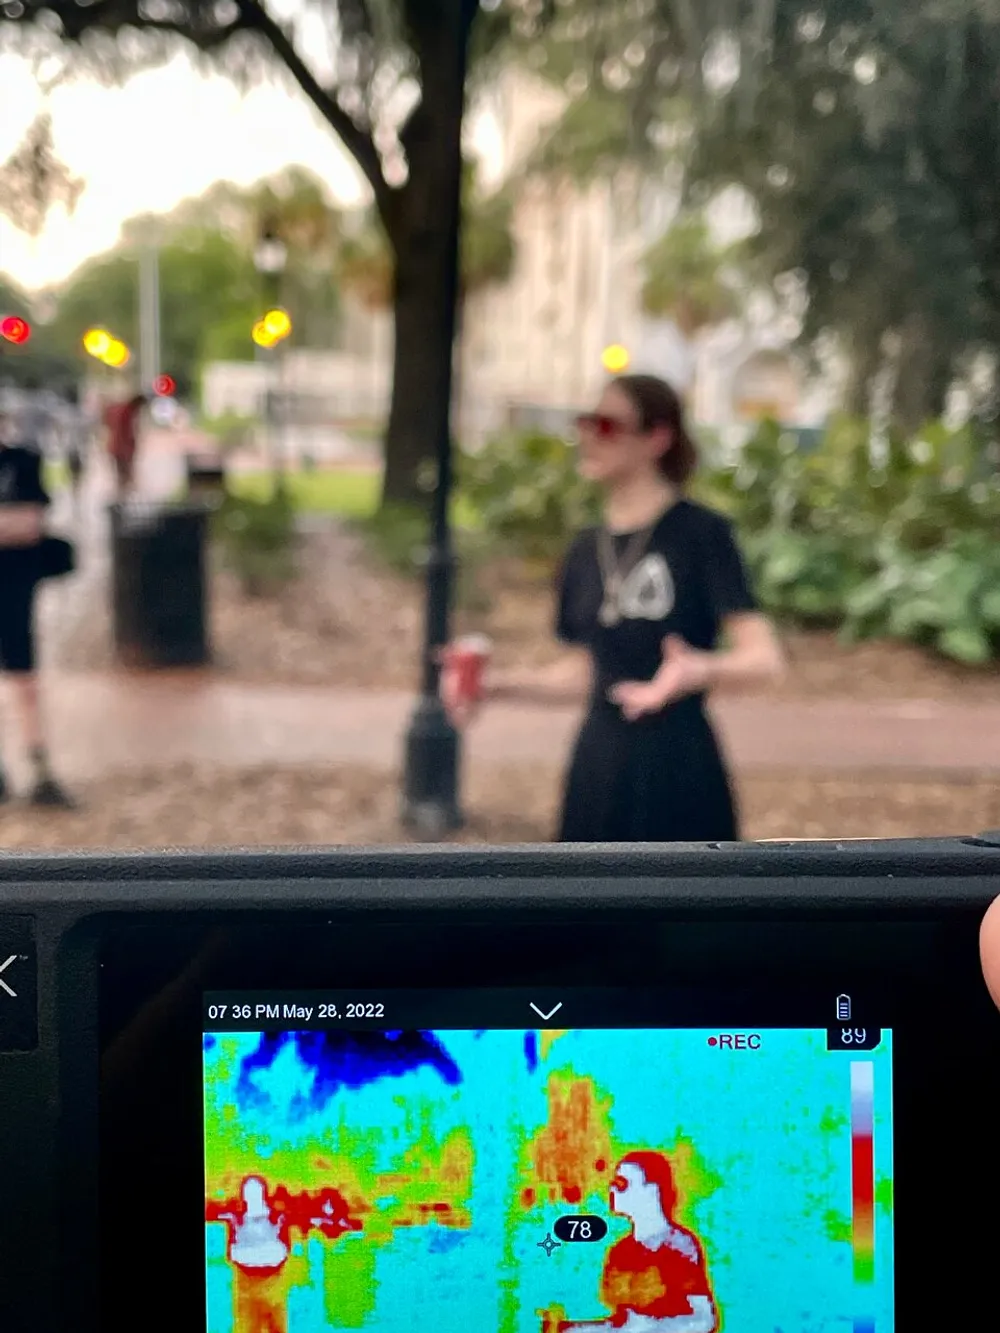 The image shows a person holding a camera with a thermal viewfinder that is focused on another person standing in the park with a time stamp indicating the photo was taken on May 28 2022 at 736 PM